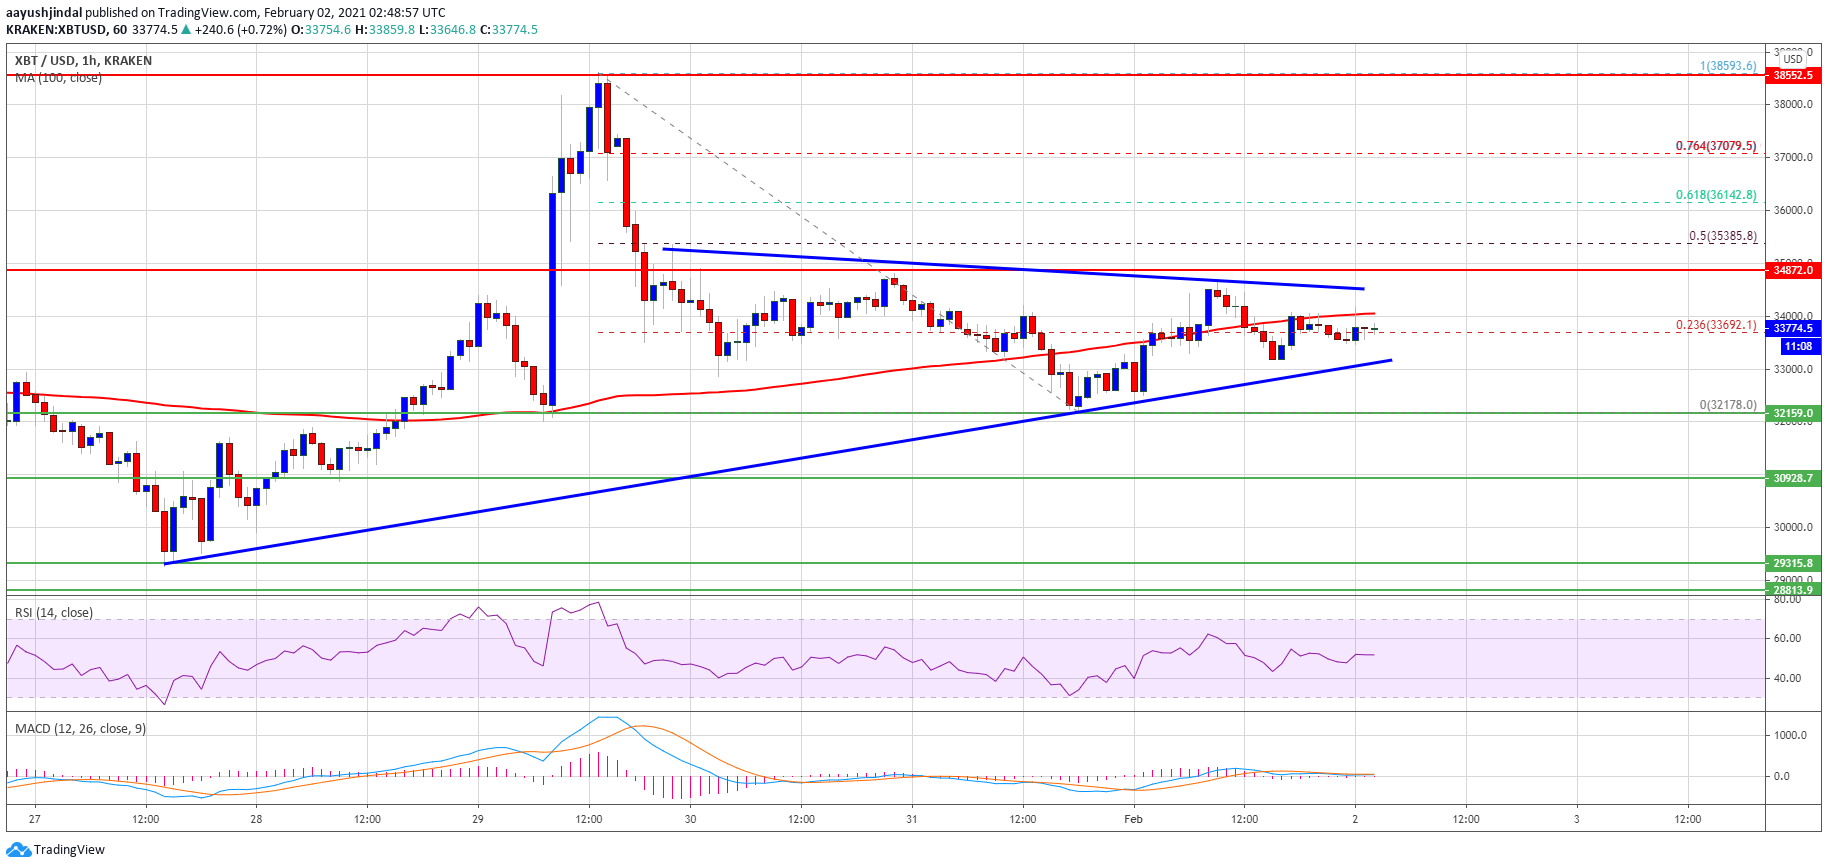 TA: Why Bitcoin Topside Bias Vulnerable If It Continues To Struggle Below $35K